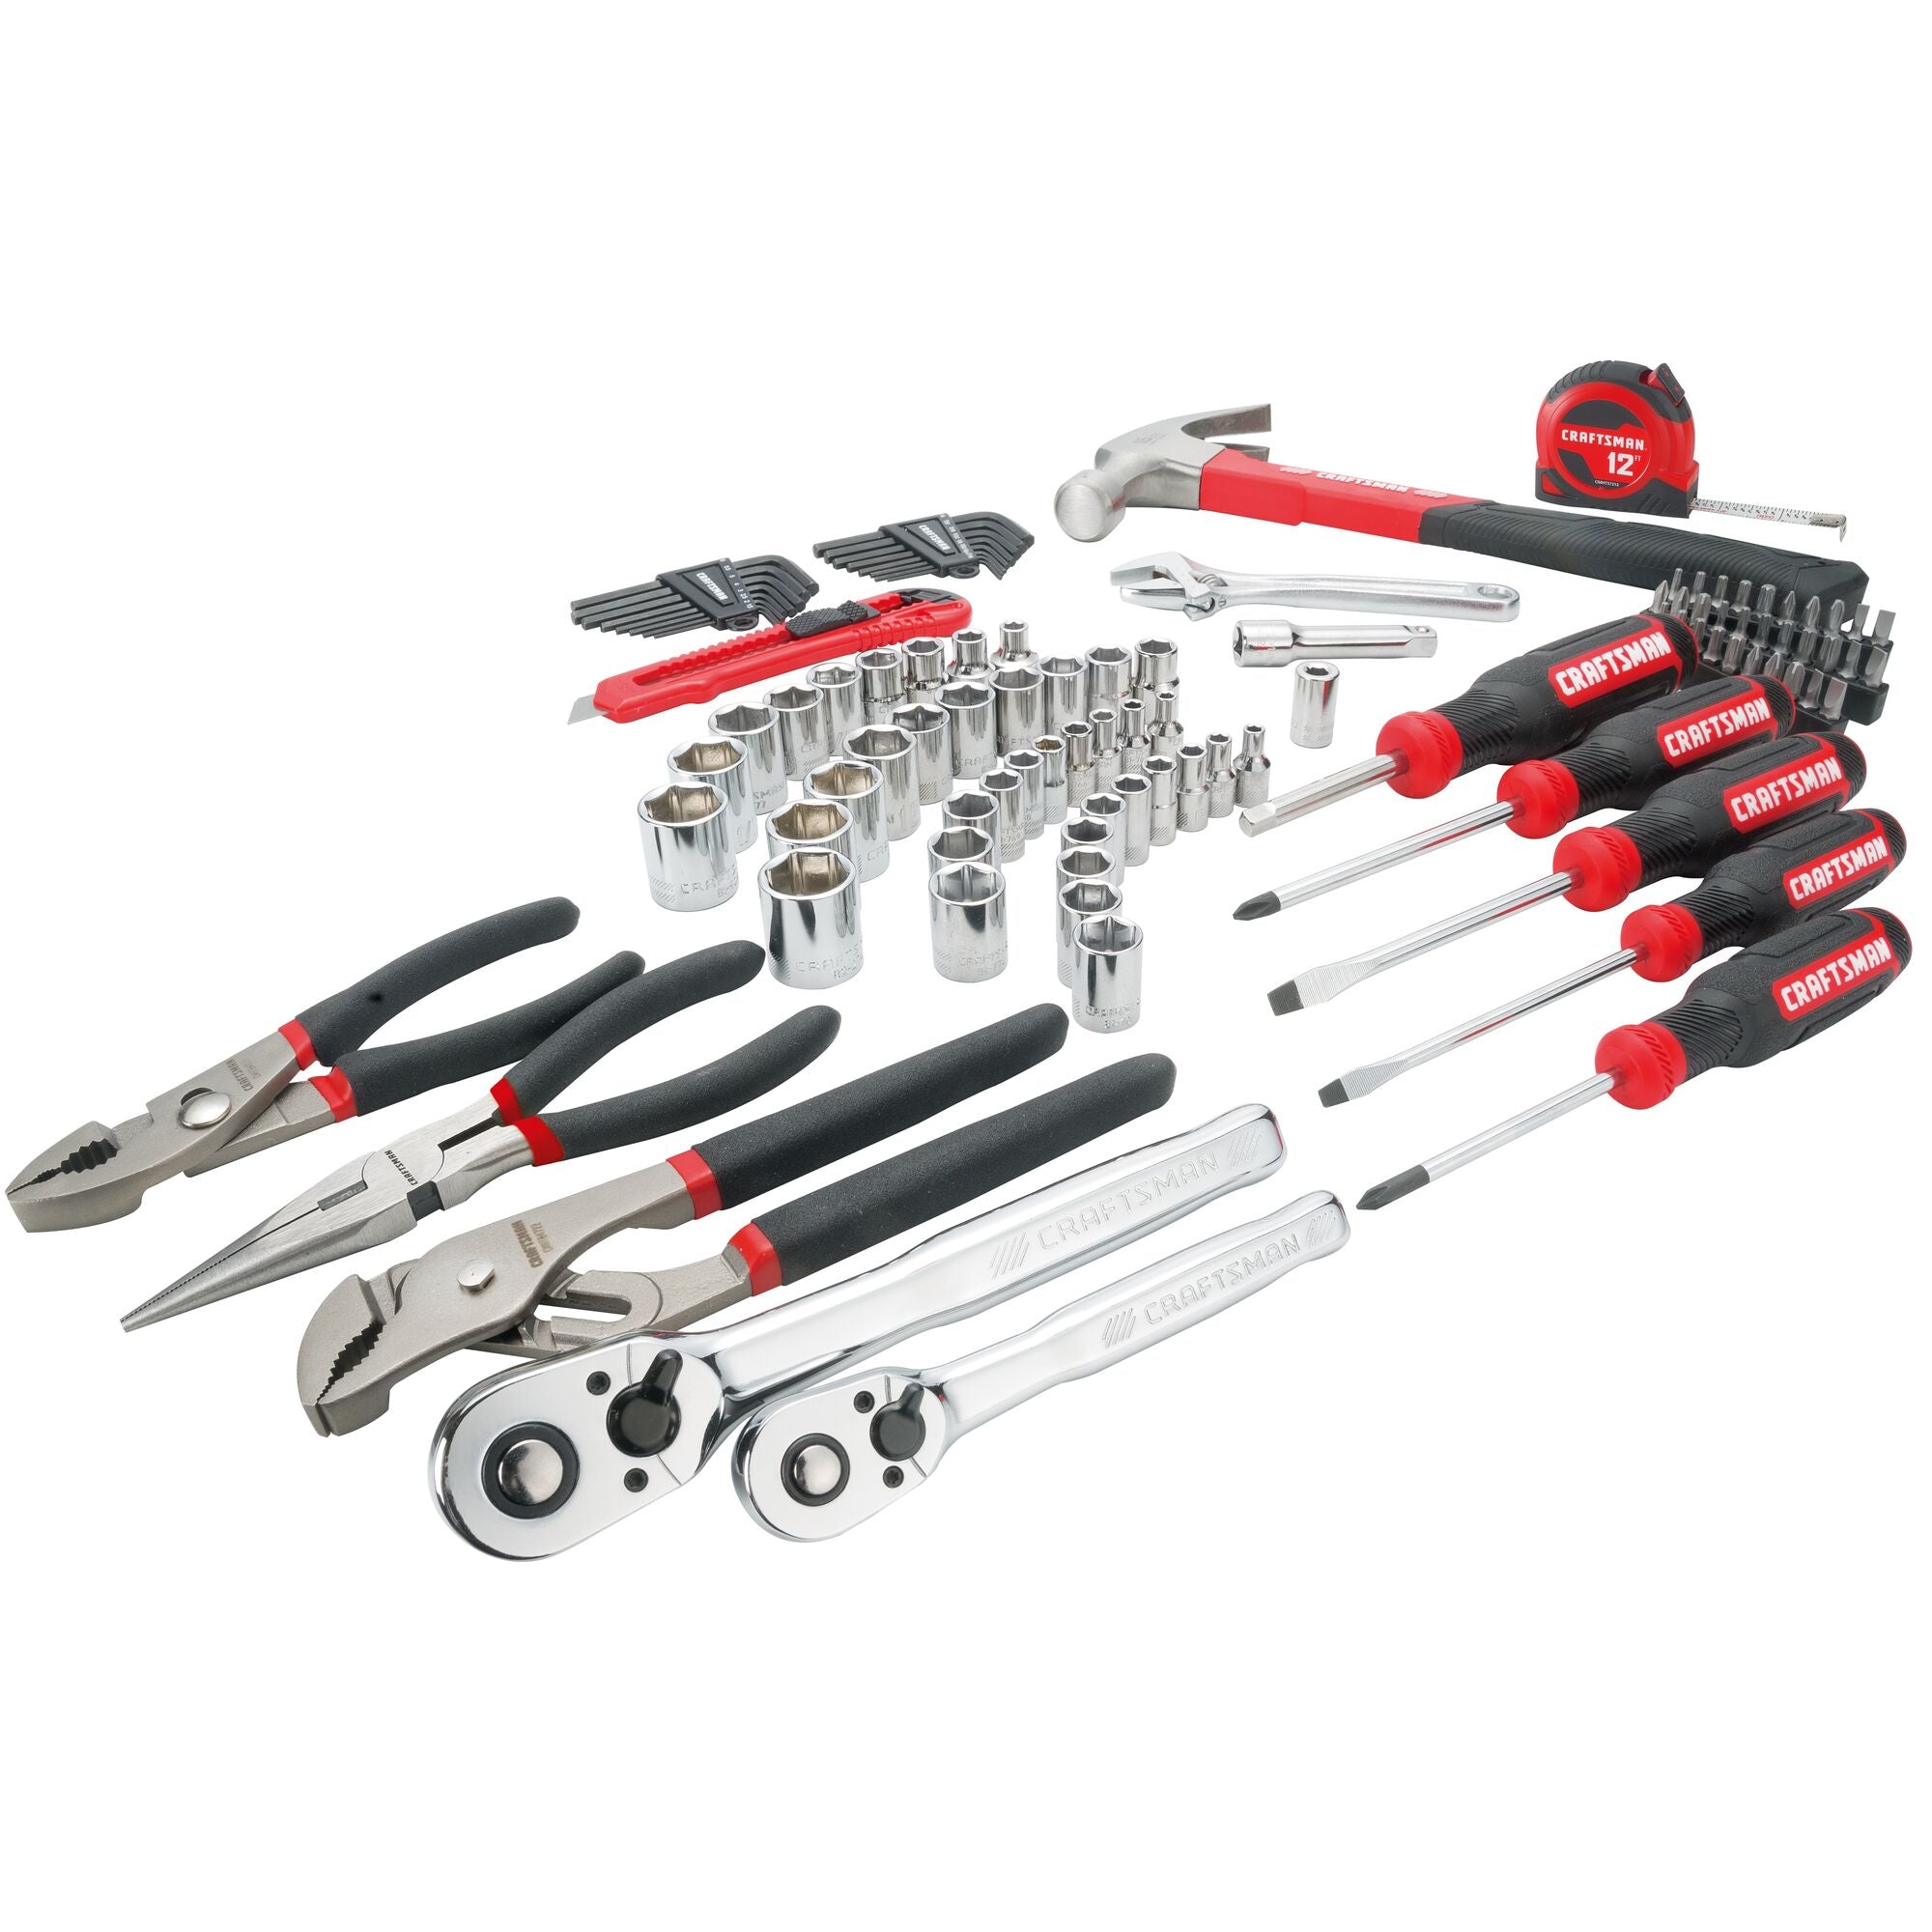 New Craftsman Evolv 43 Piece Tool Set Wrenches Sockets Screwdrivers